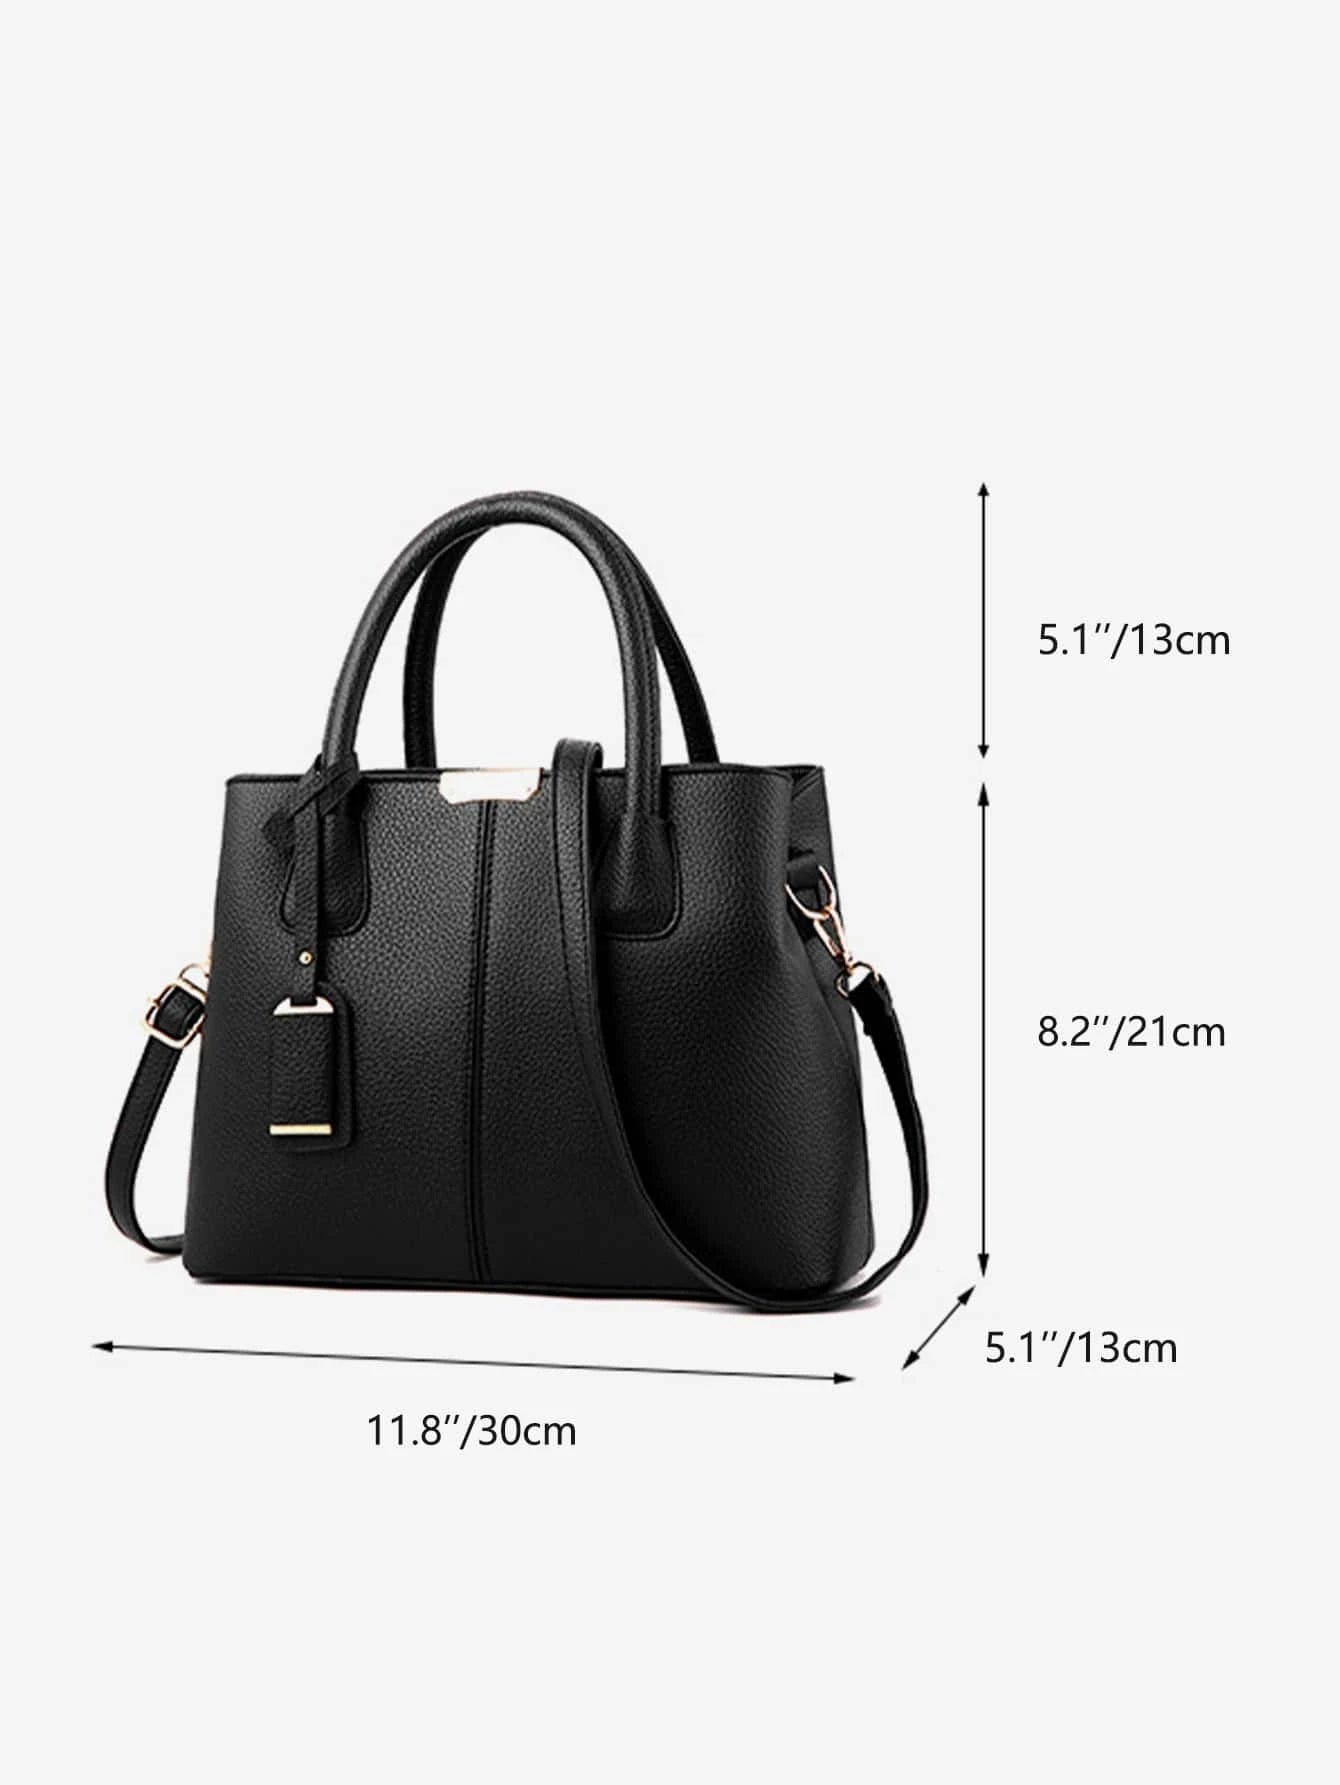 SHEIN Simple Artificial Leather Handbag, Women's Elegant Crossbody Bag With Zipper Stylish, Litchi Embossed Top Handle Bag With Bag Charm